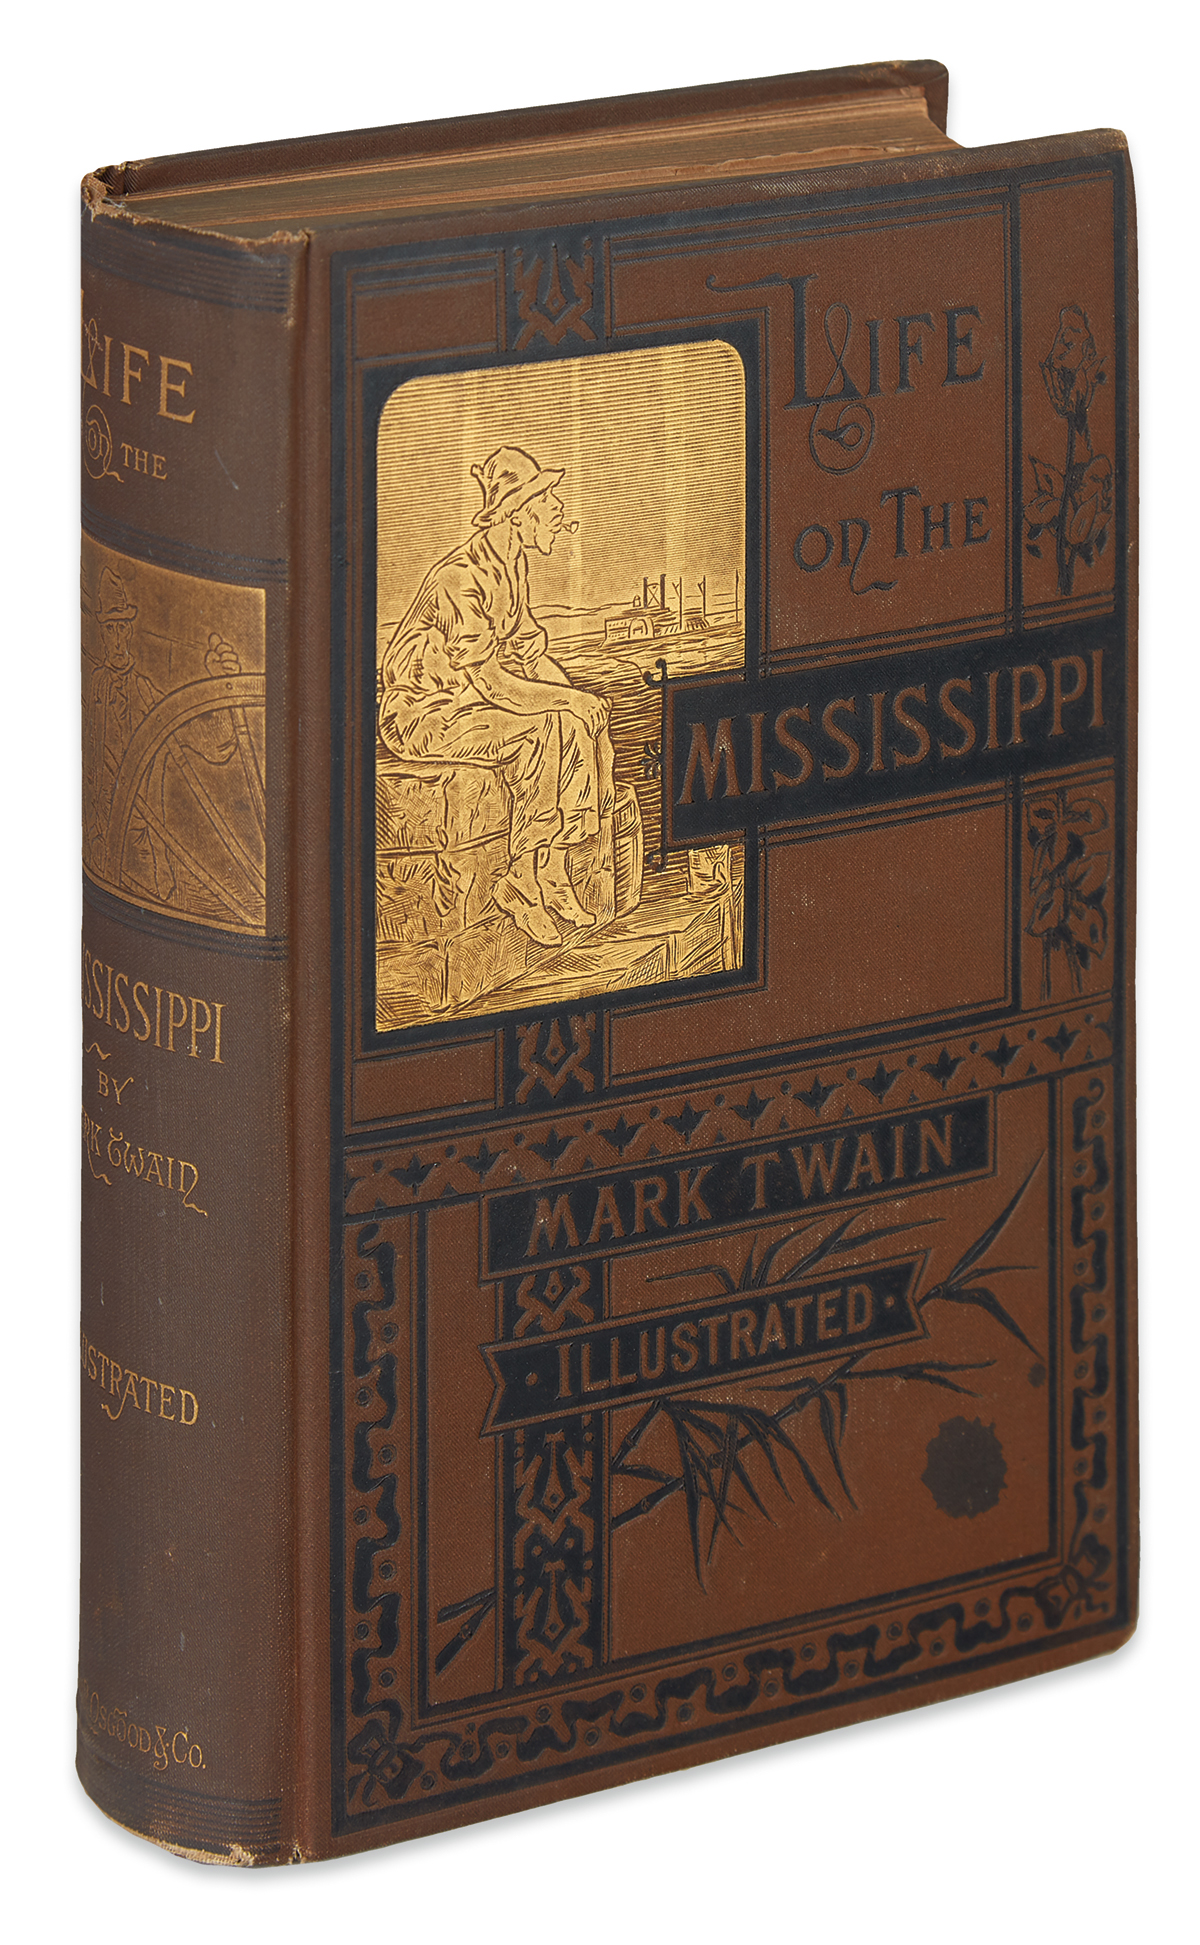 TWAIN, MARK. Life on the Mississippi.